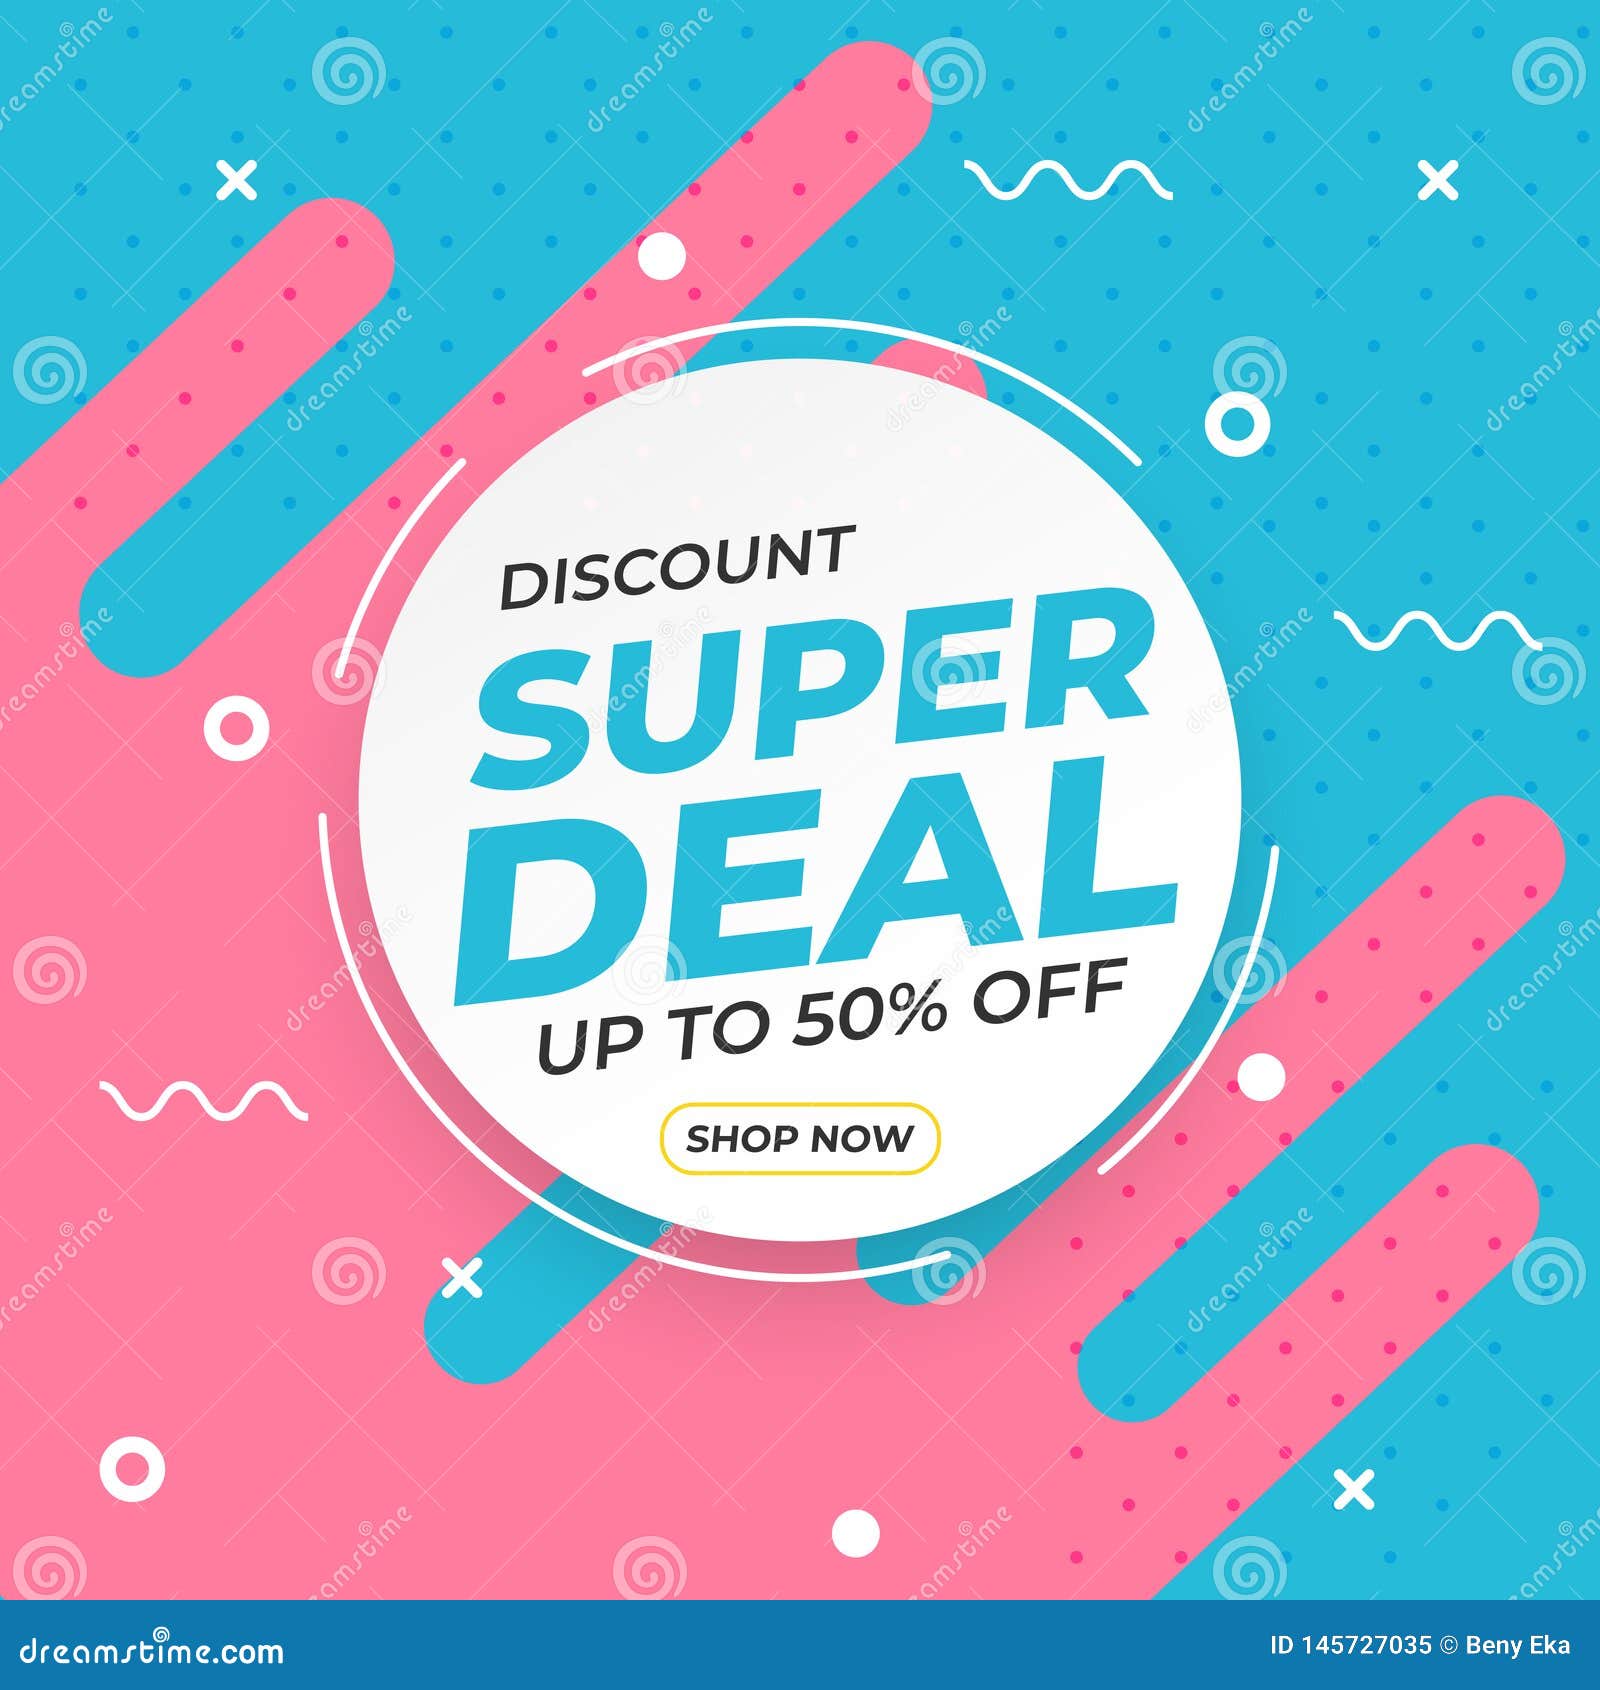 sale banner template with super deal up to 50 percent off preset text on circle  and liquid pink blue background